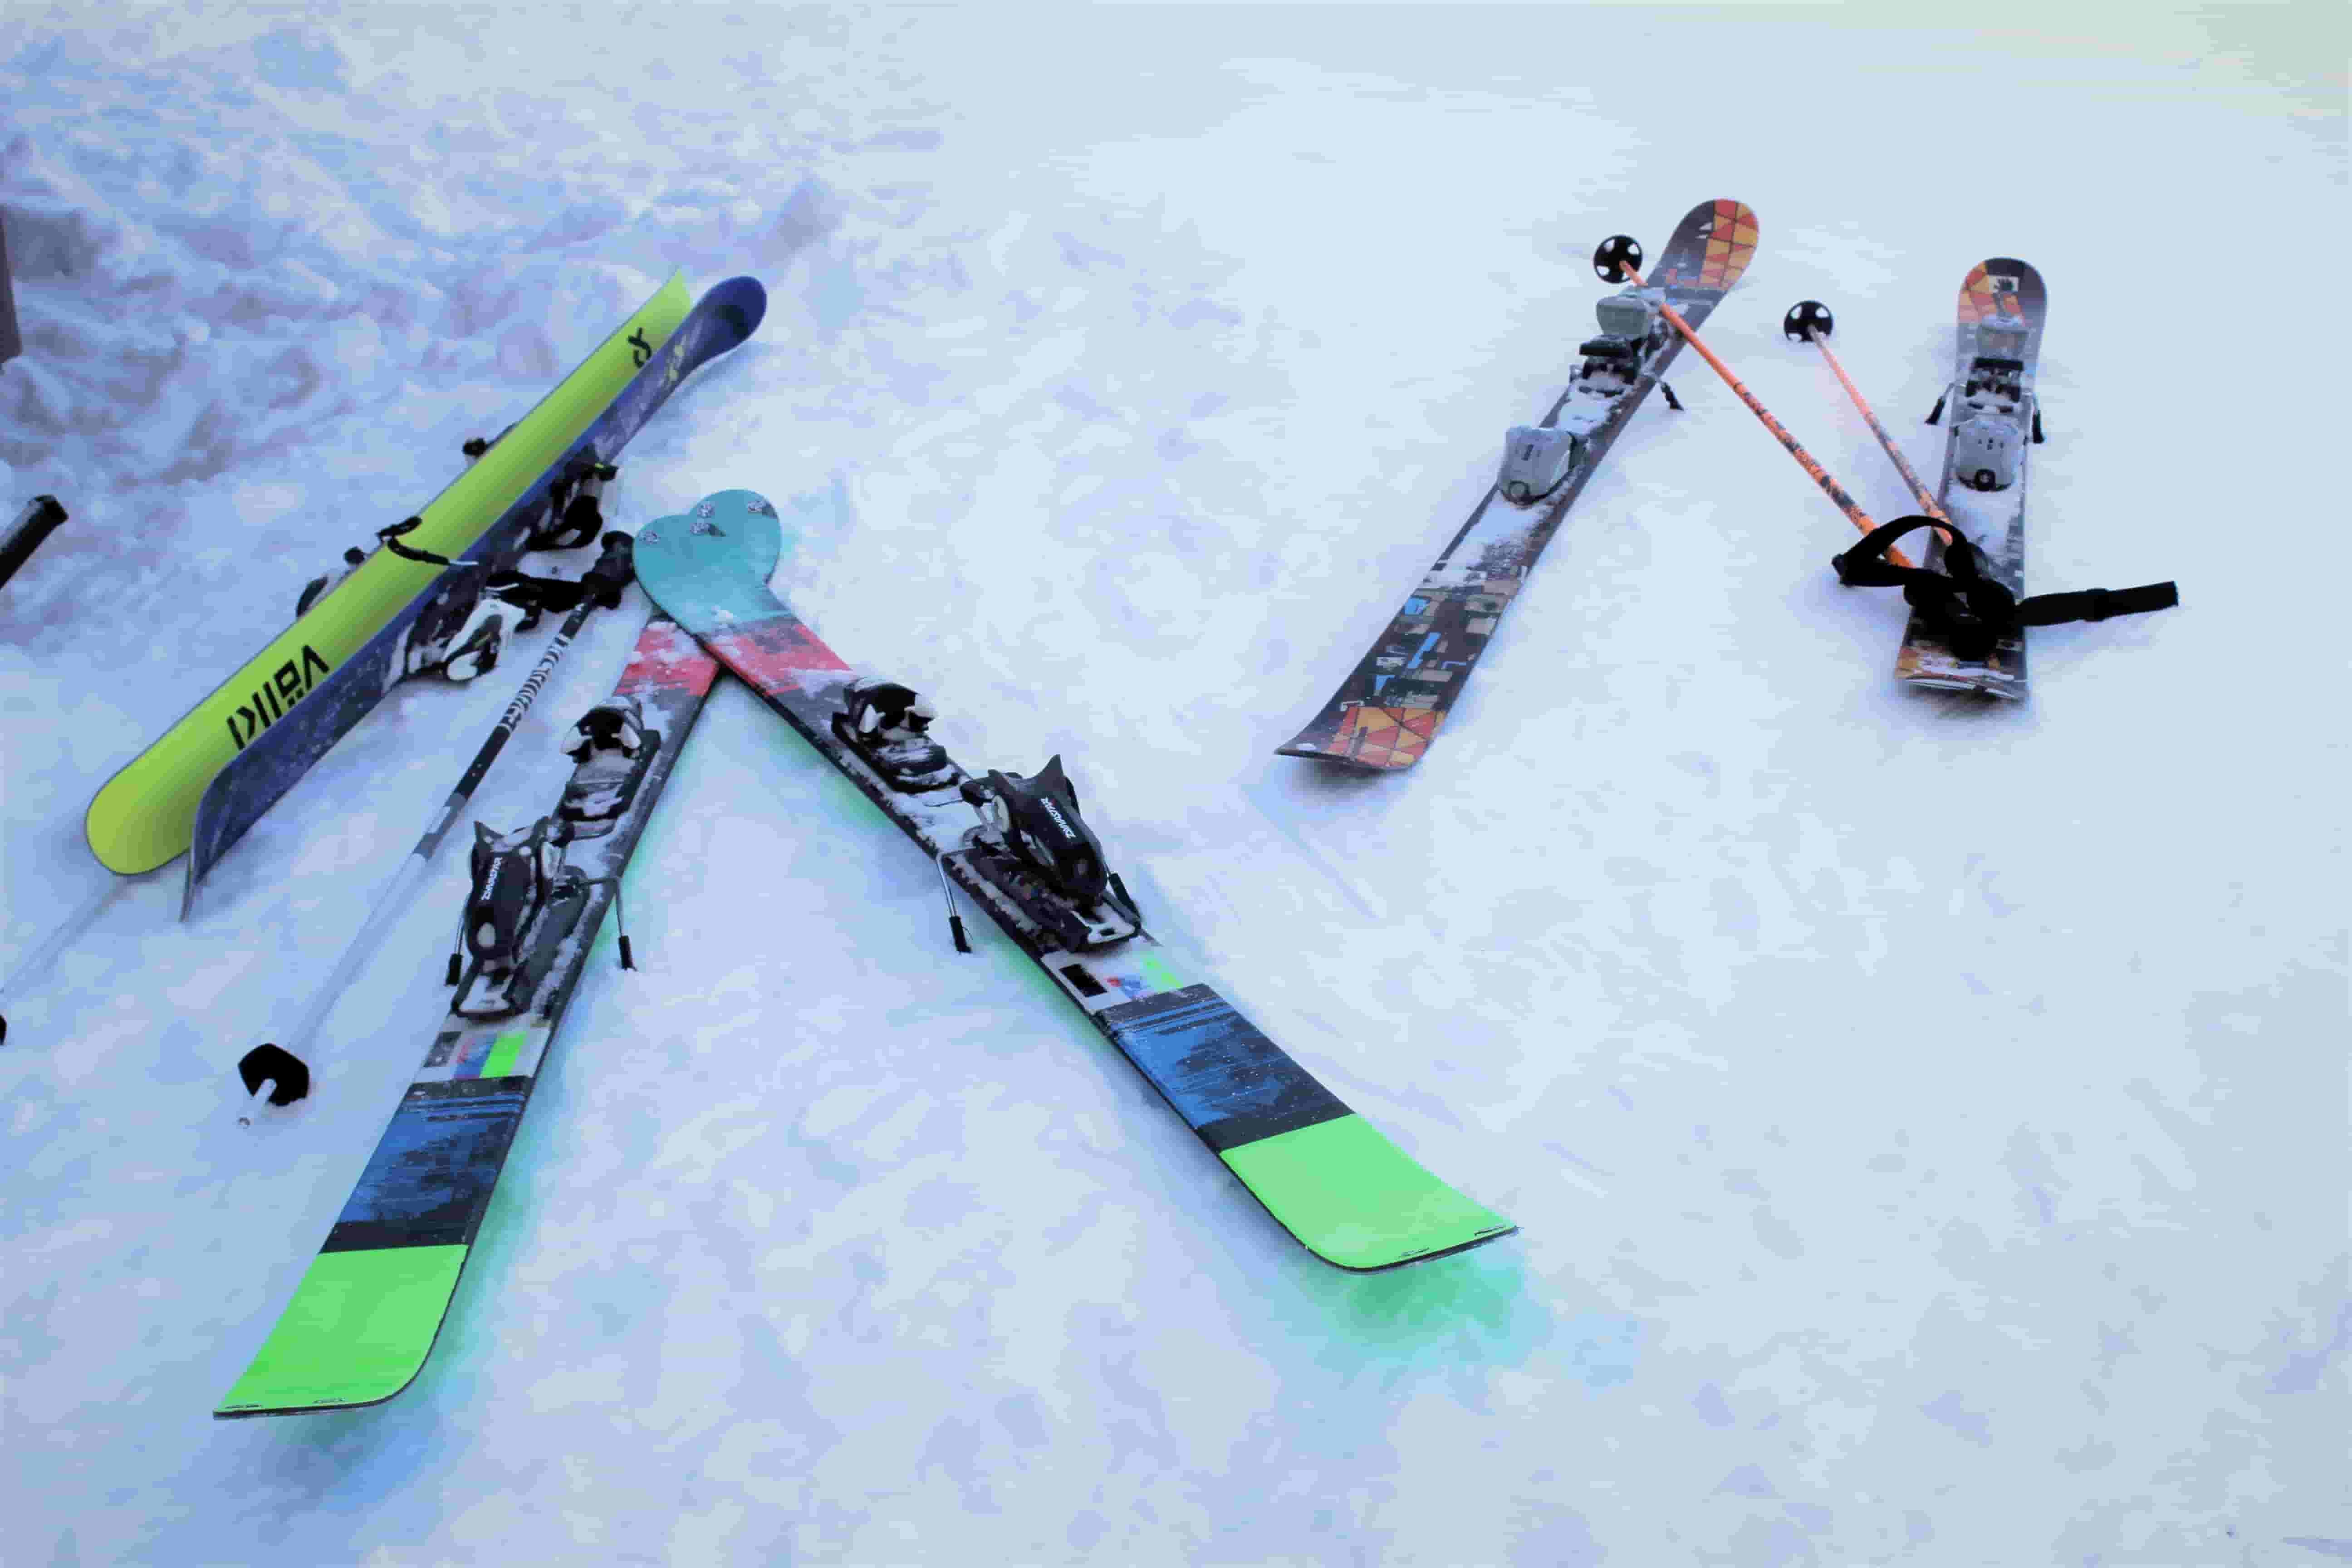 How to Choose Downhill Skis